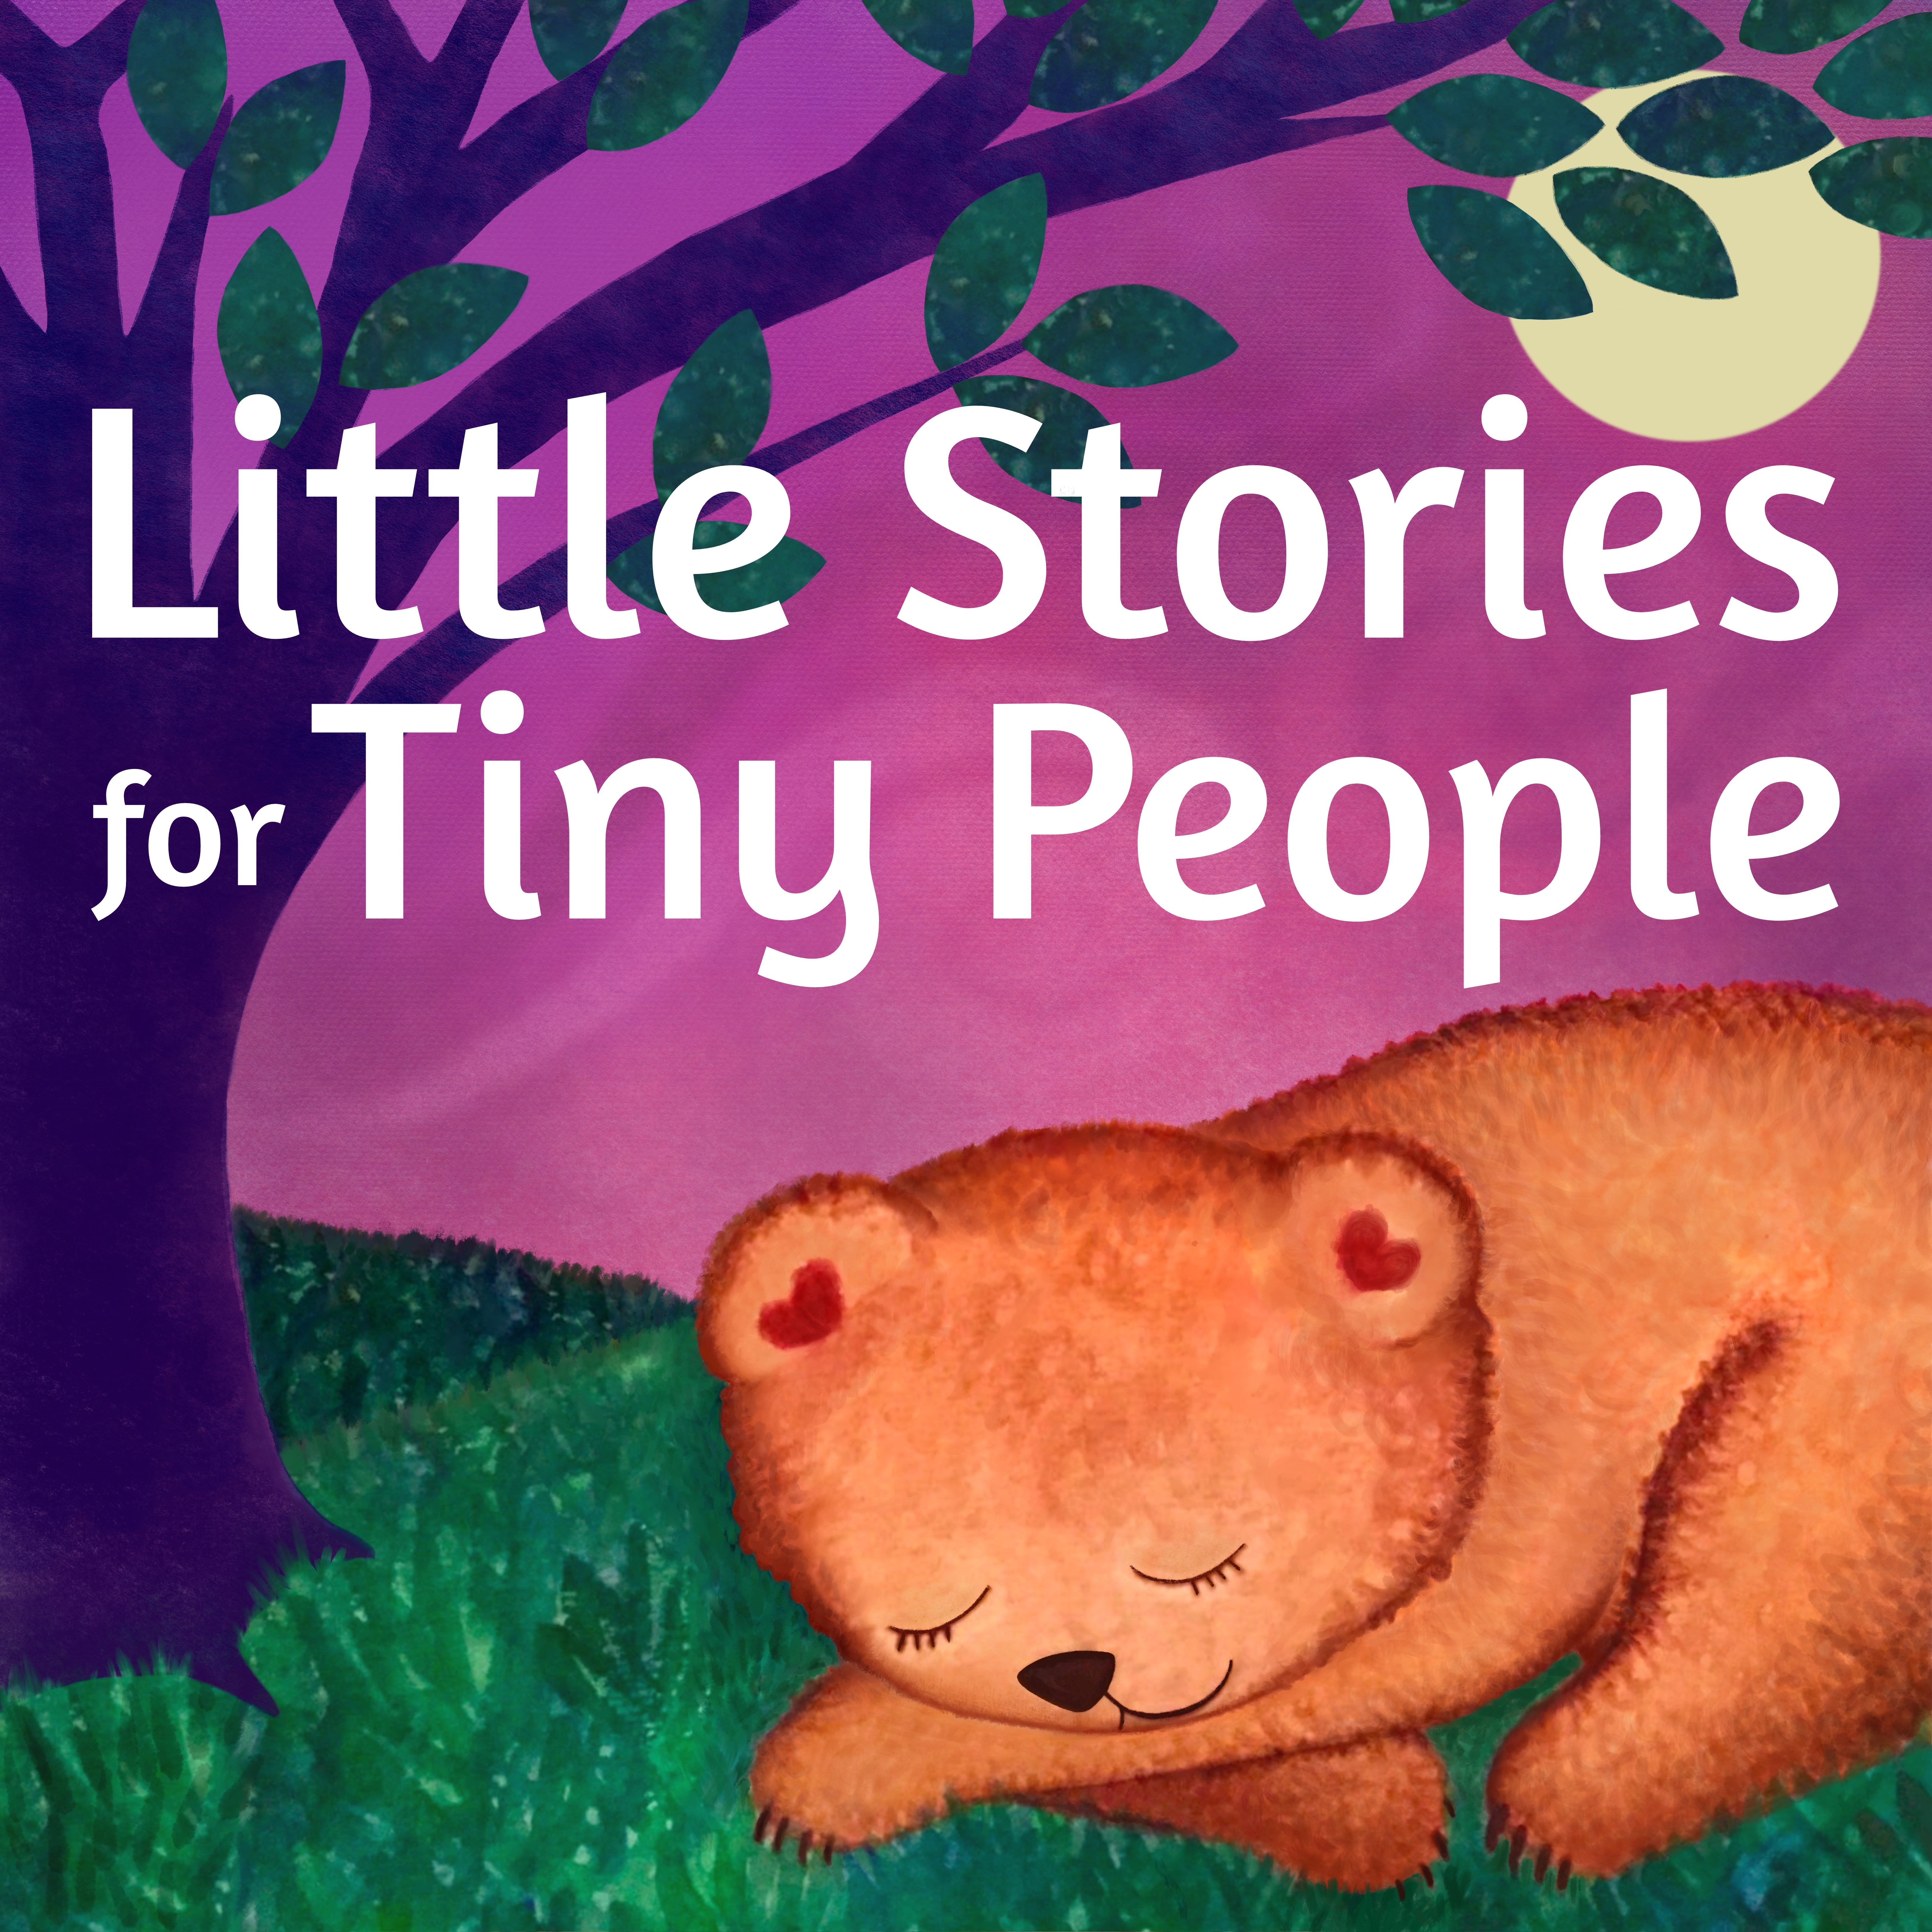 Little history. Little Store. Little story. Little stories for Kids. For story.